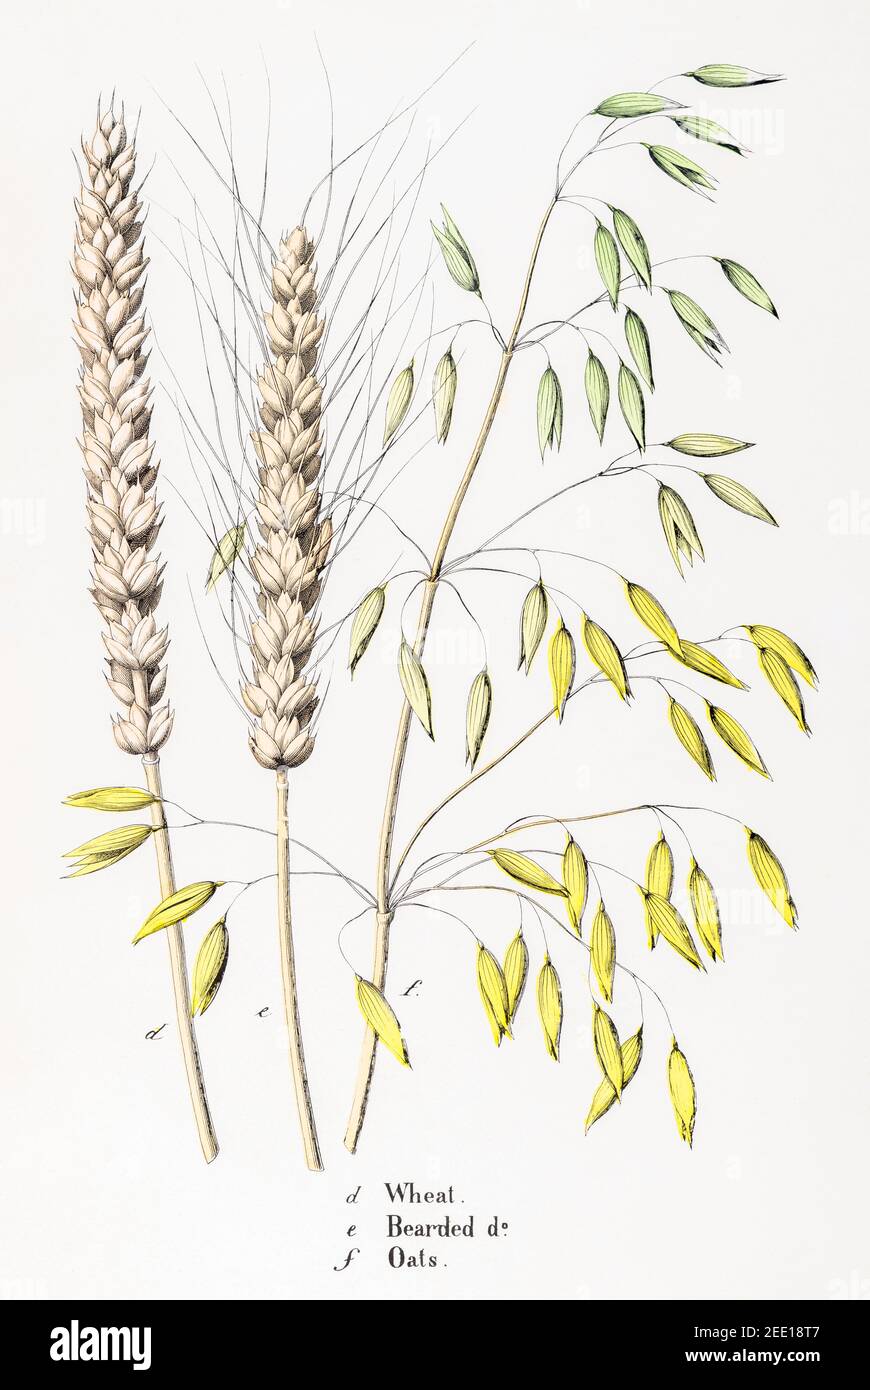 Digitally restored 19th century Victorian botanical illustration of Wheat, Bearded Wheat and Oats cereals. See notes for source and process info. Stock Photo